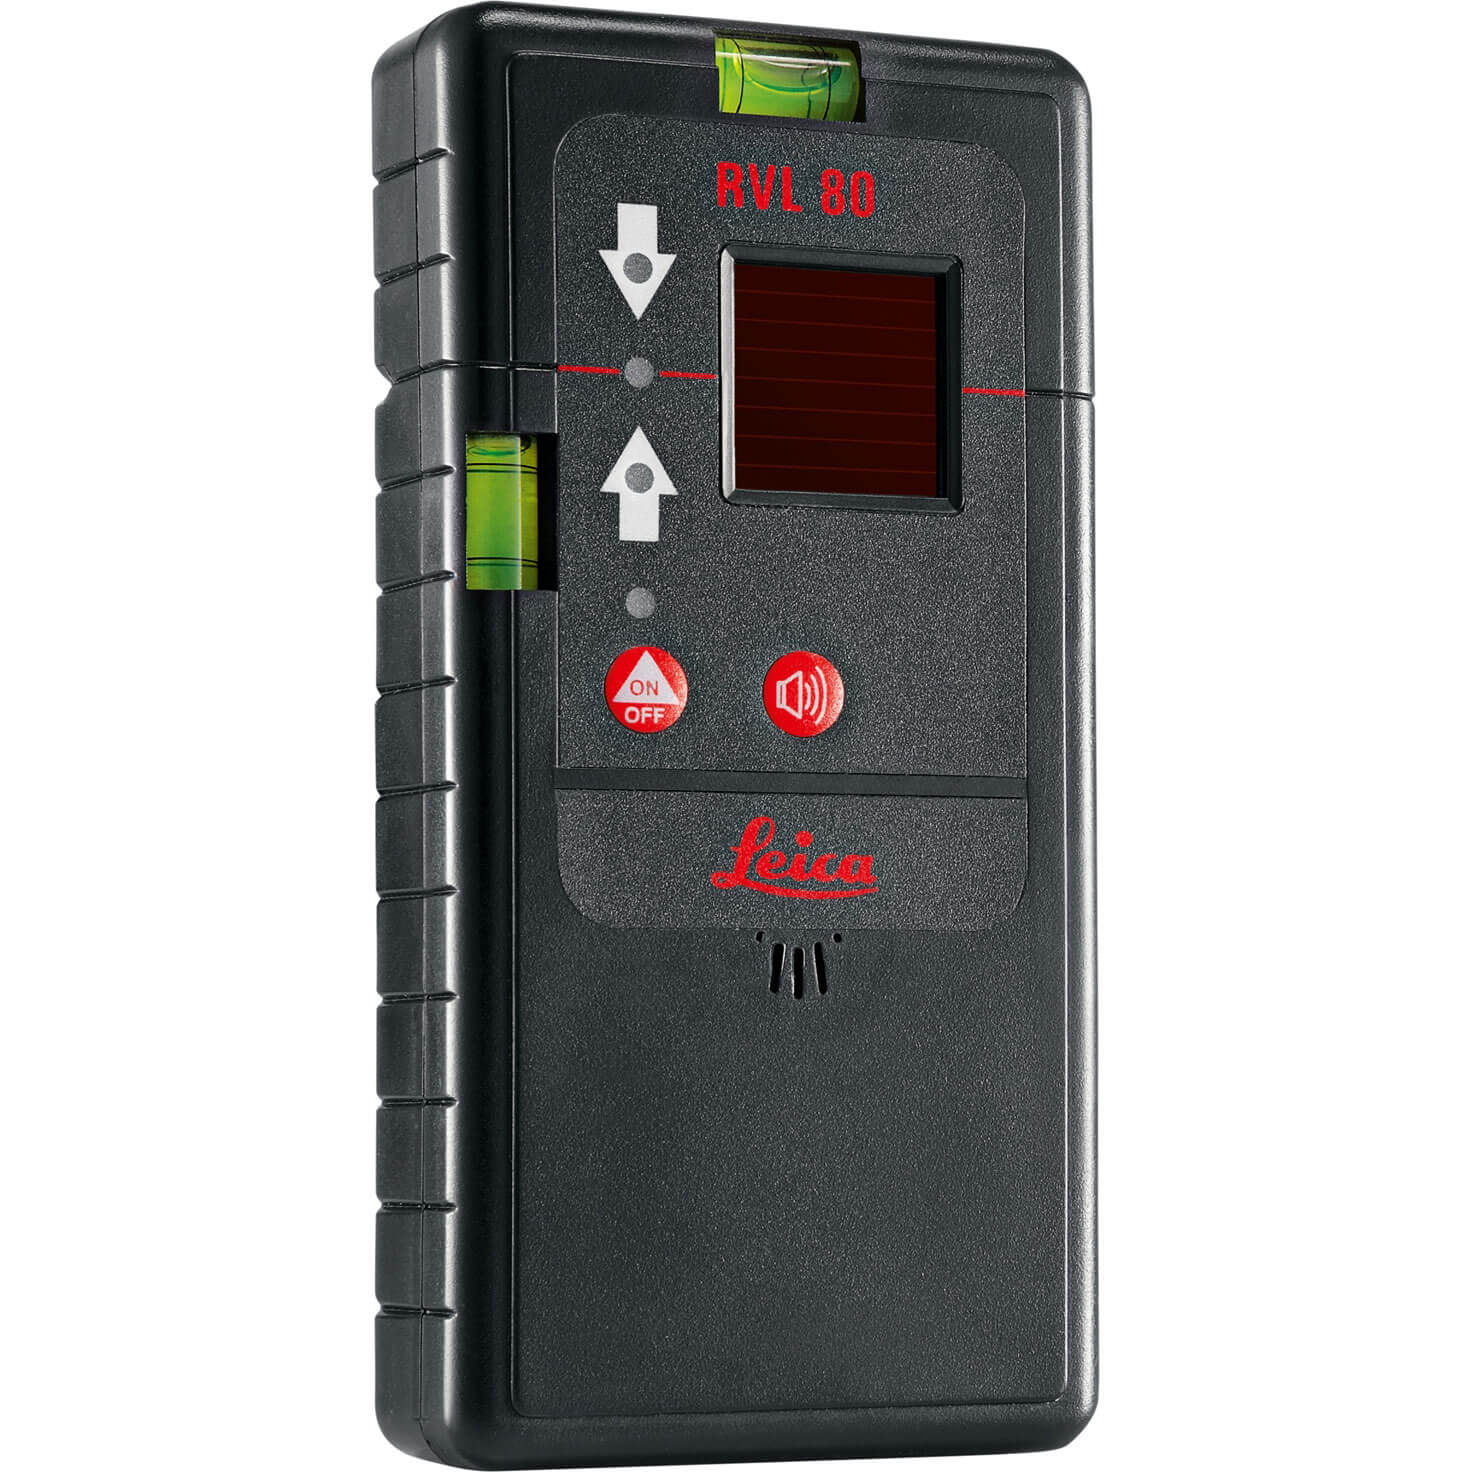 Image of Leica Geosystems RVL 80 Line Receiver For Lino Laser Level